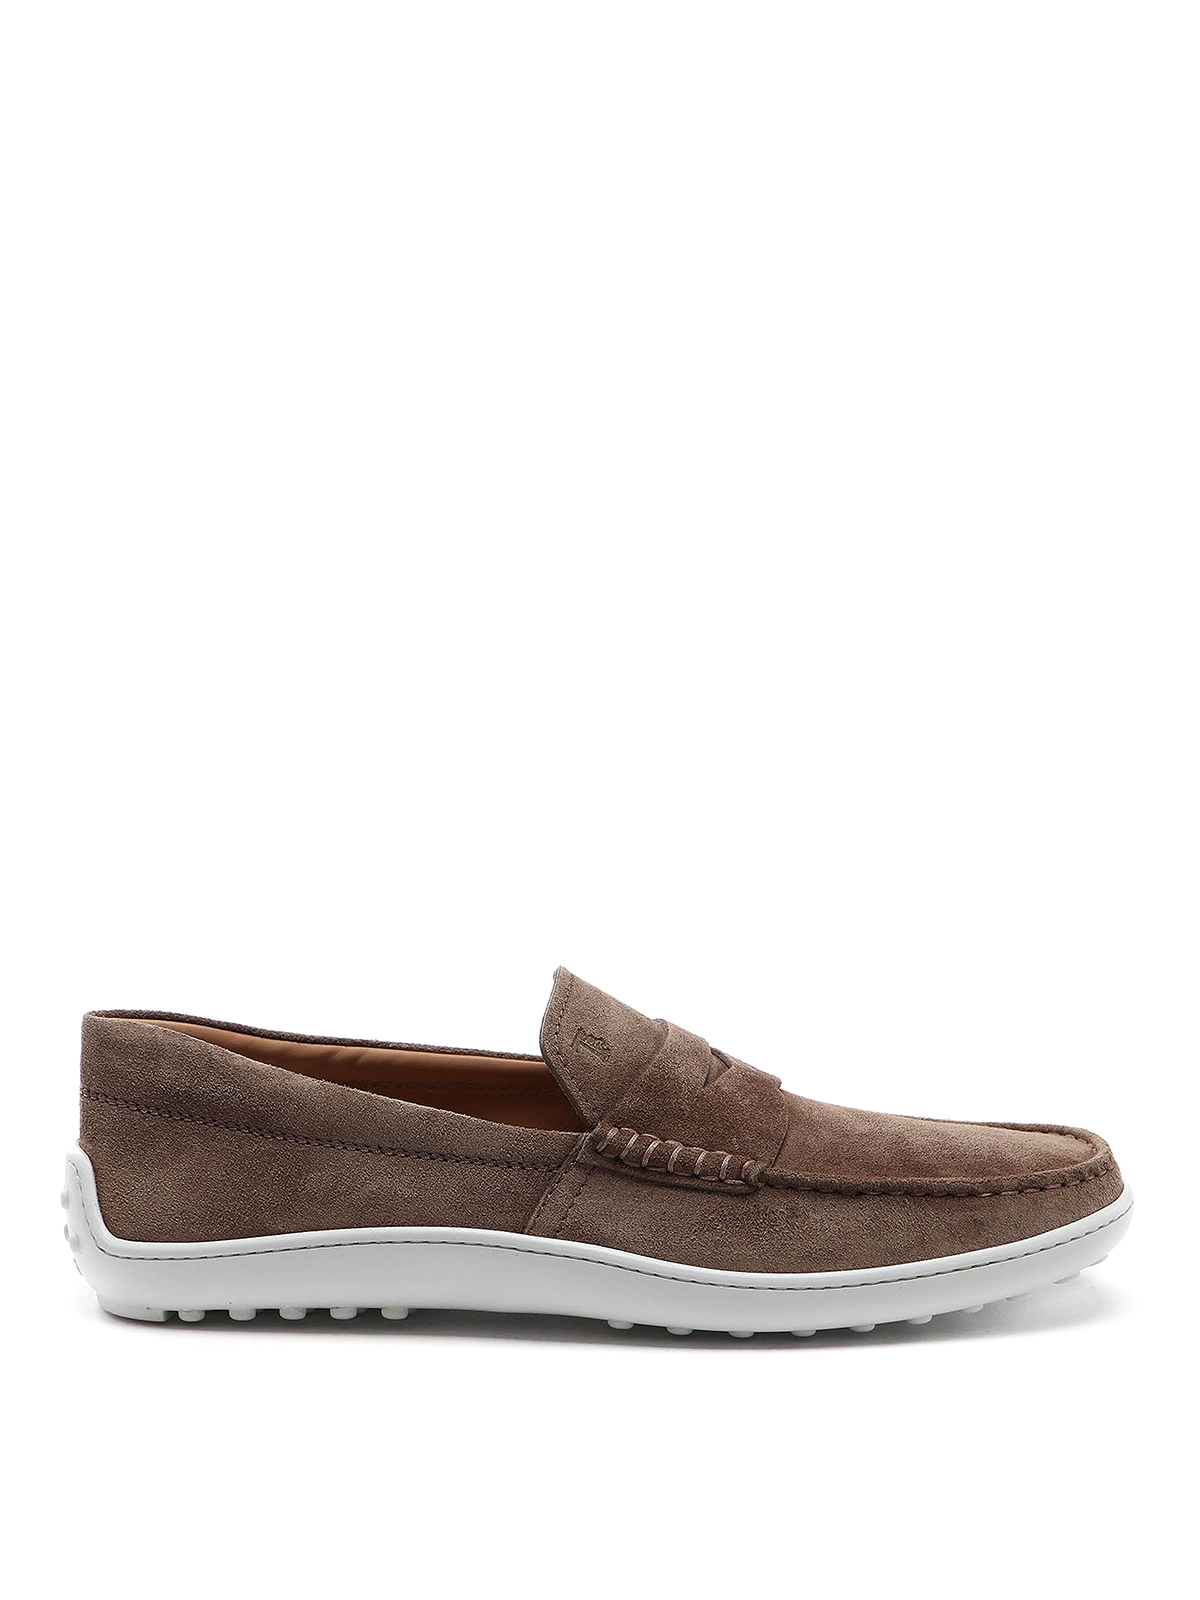 TOD'S GOMMINO SUEDE LOAFERS